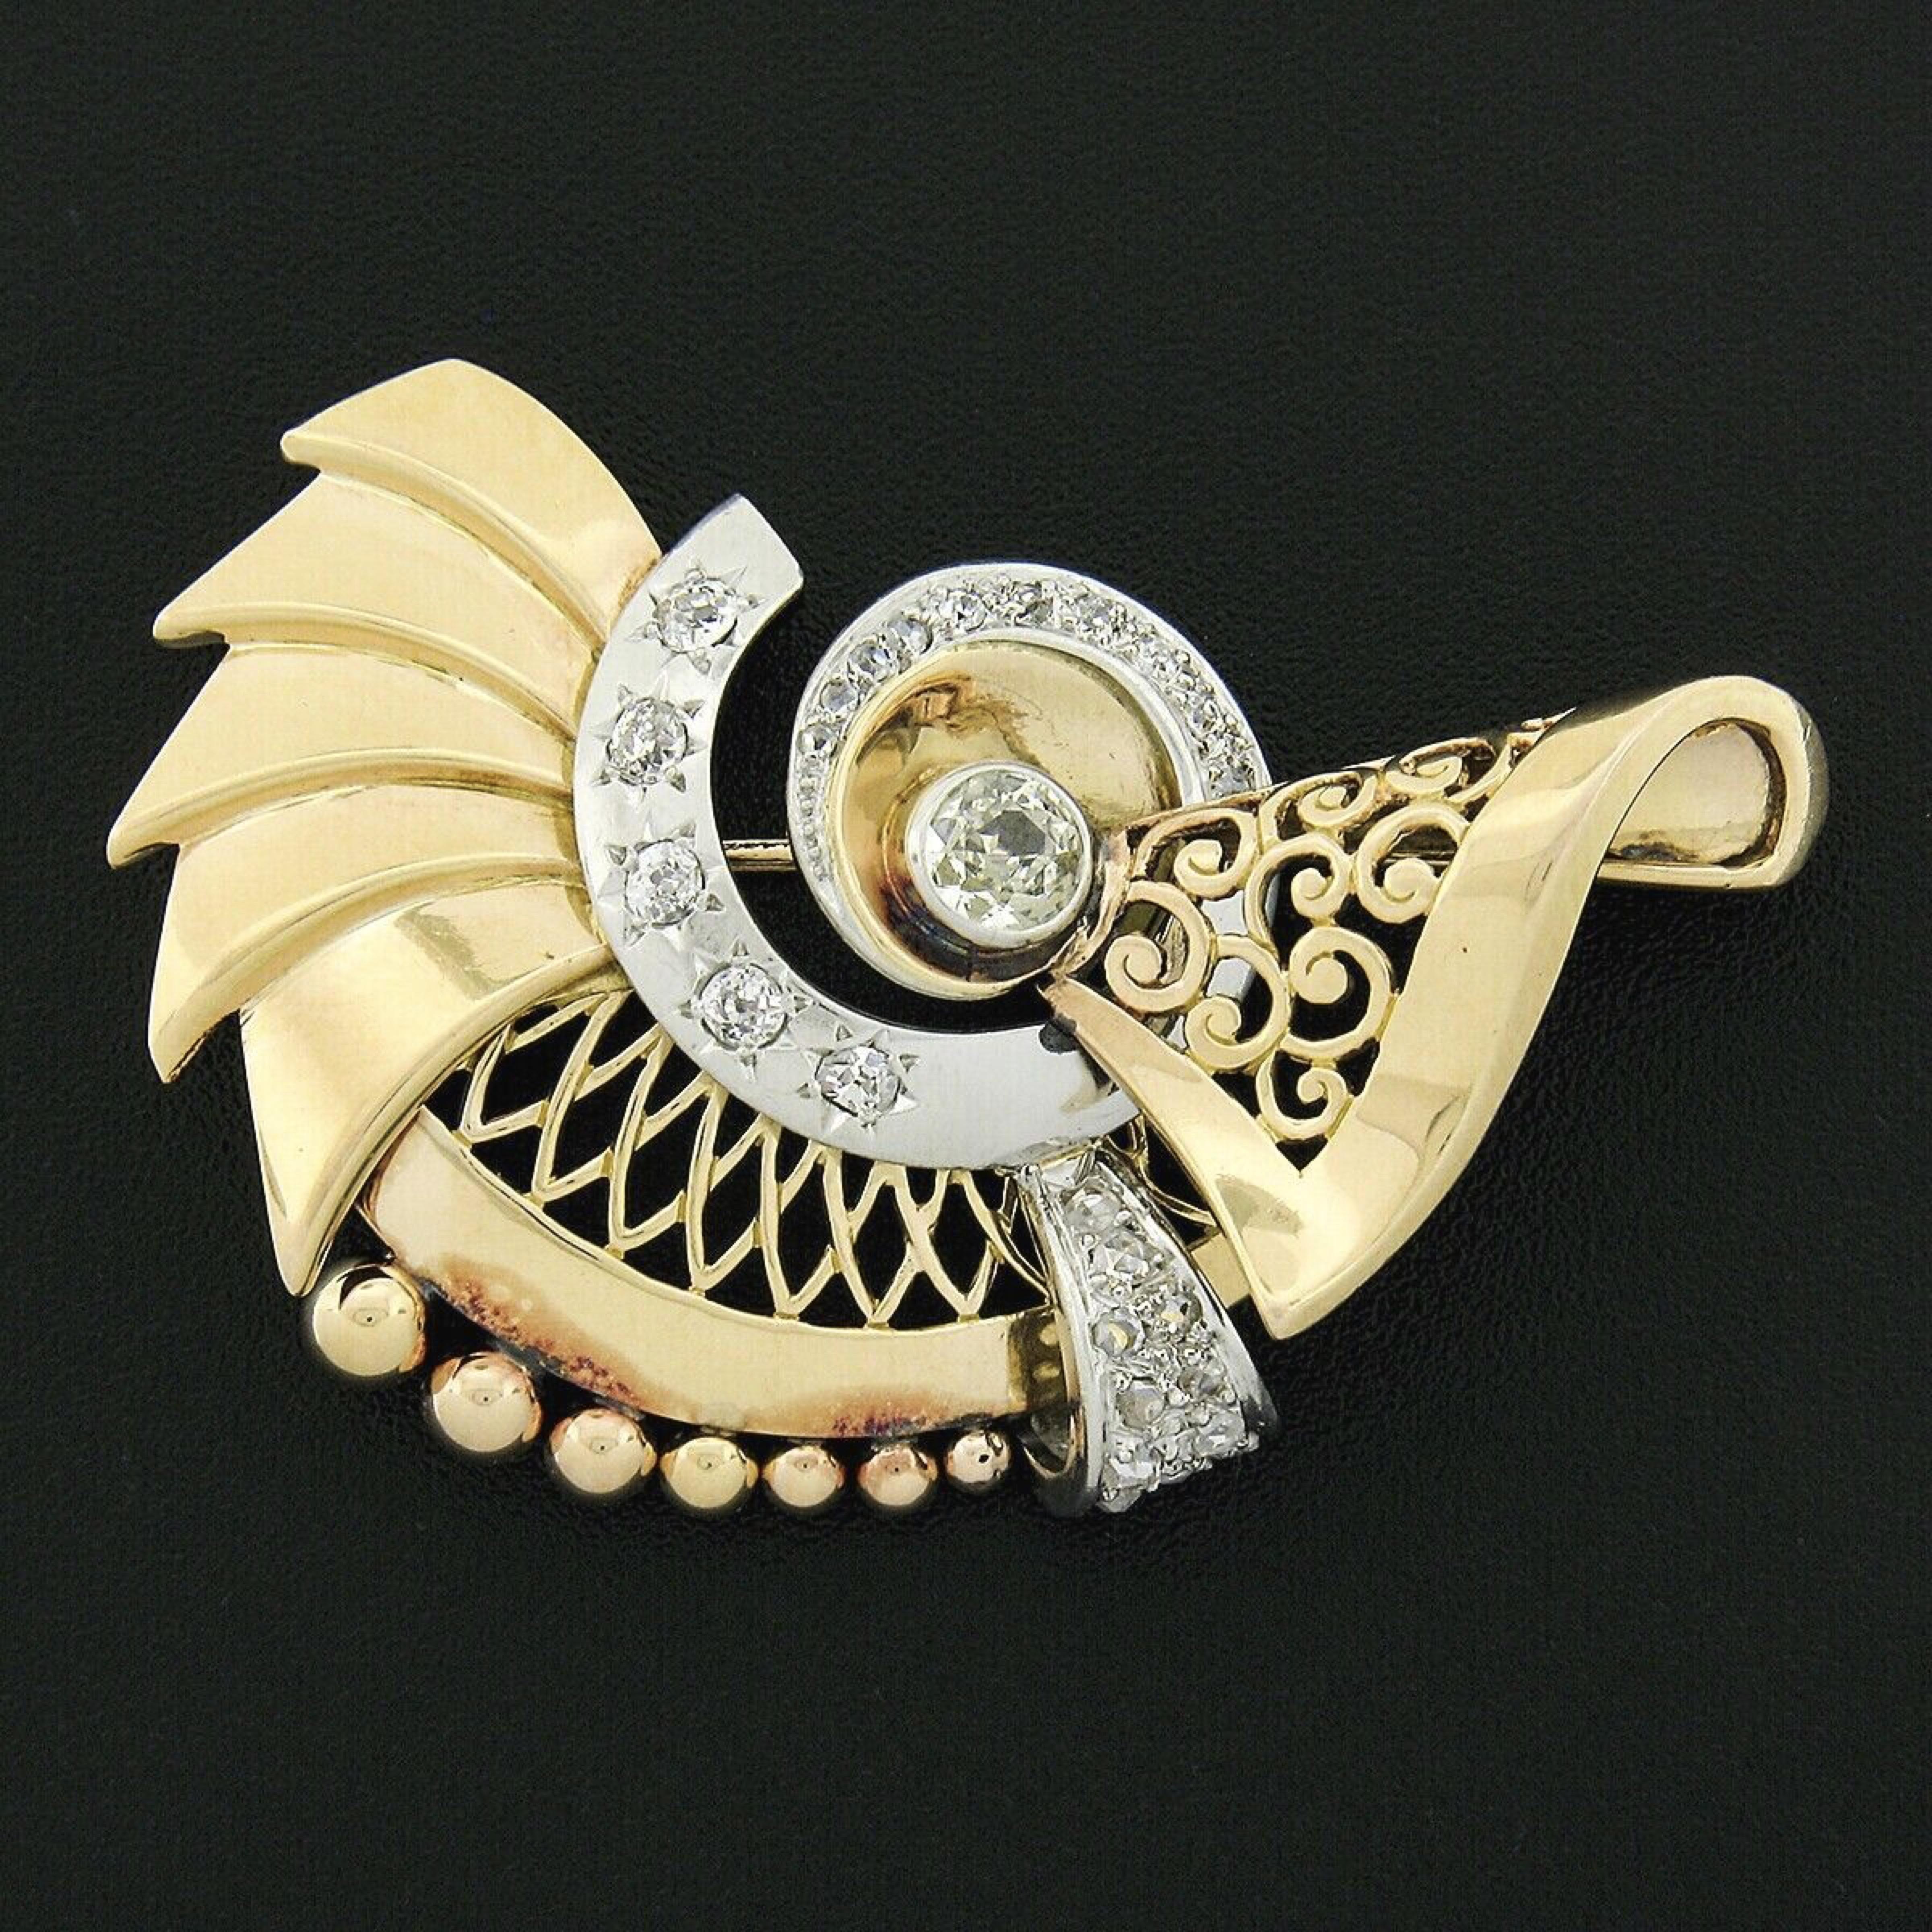 Here we have a gorgeous retro vintage European brooch that was crafted from solid 18k gold and platinum. It features an outstanding design set with a fine quality old European cut diamond neatly bezel set at the center of the swirl design, standing